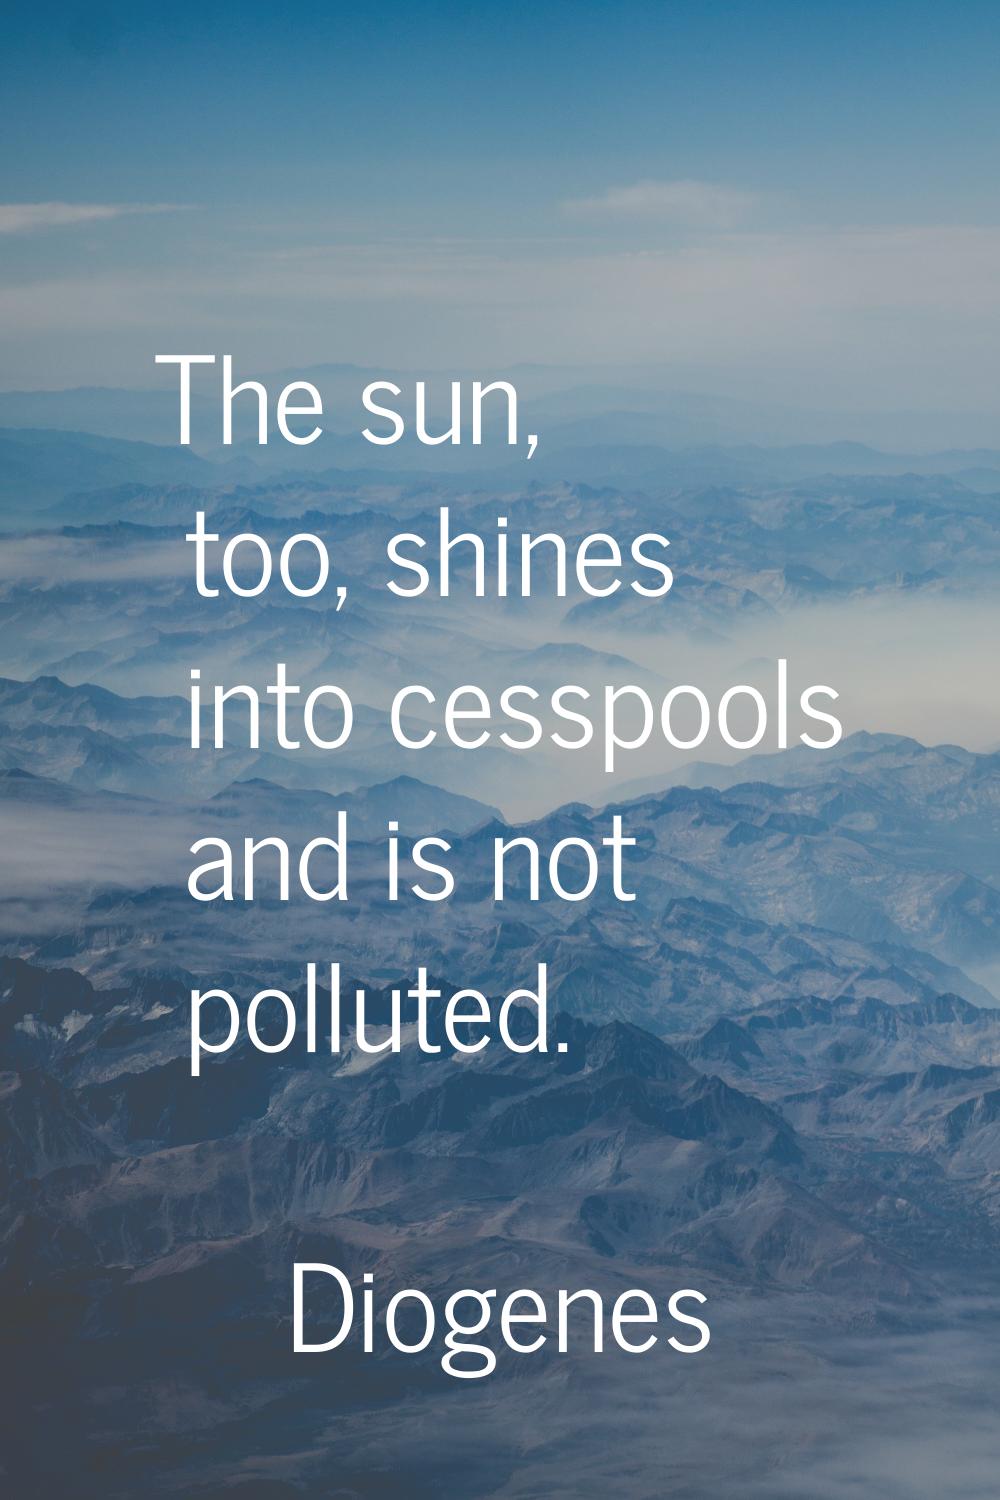 The sun, too, shines into cesspools and is not polluted.